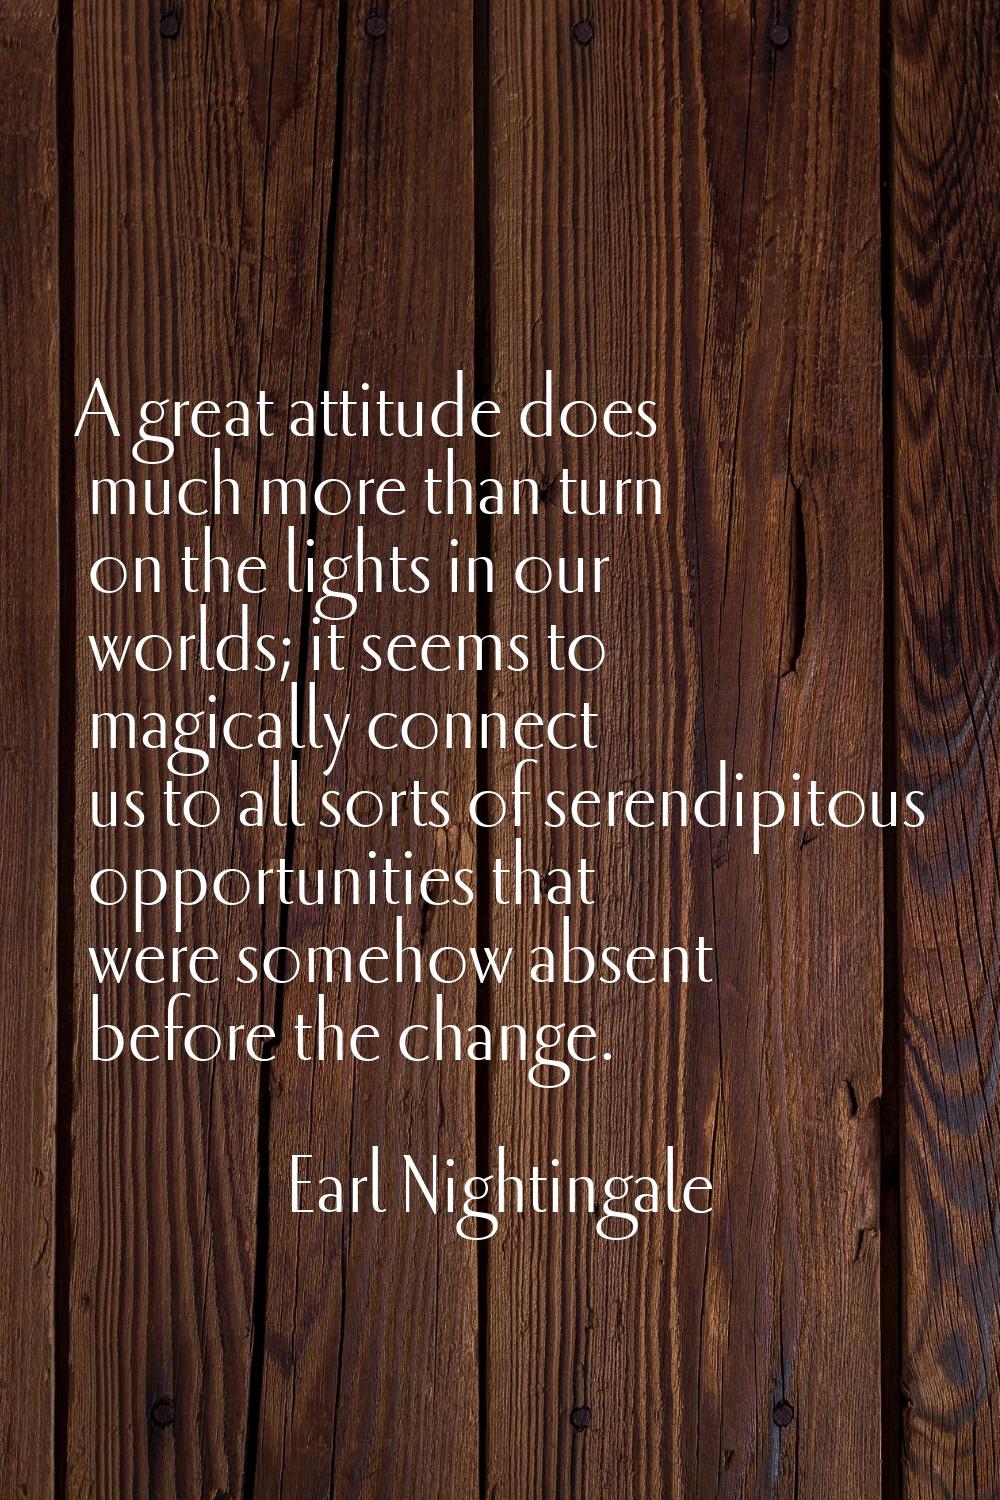 A great attitude does much more than turn on the lights in our worlds; it seems to magically connec